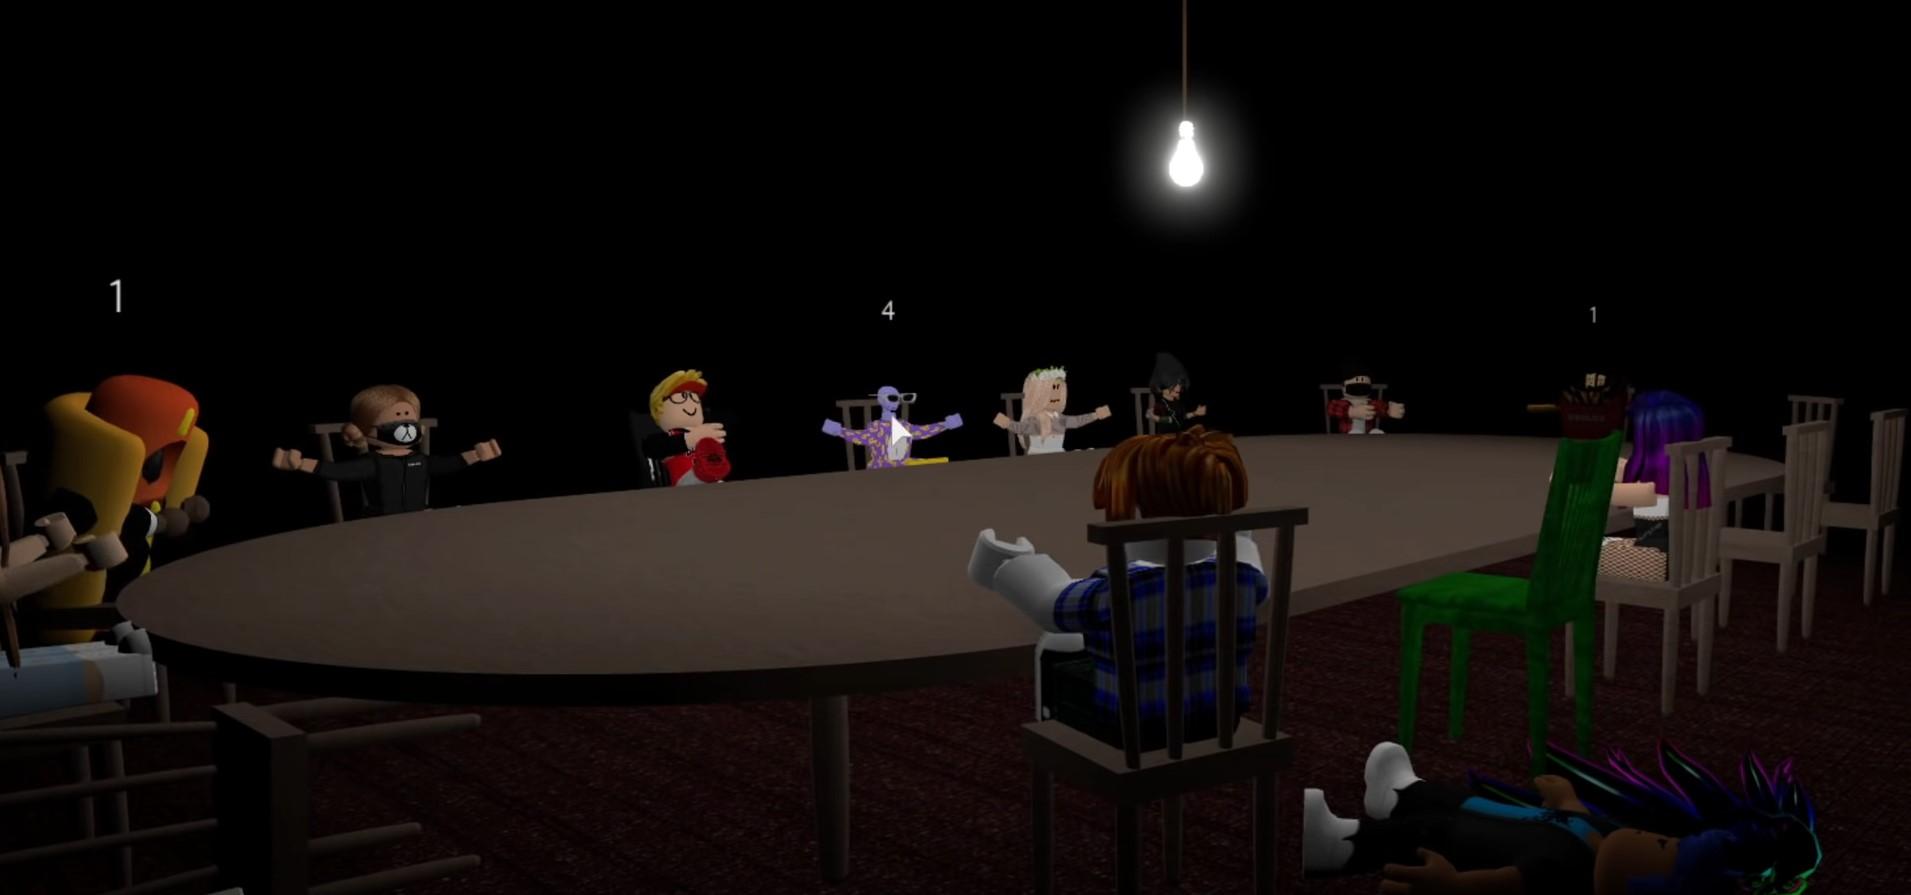 Breaking Point - Roblox